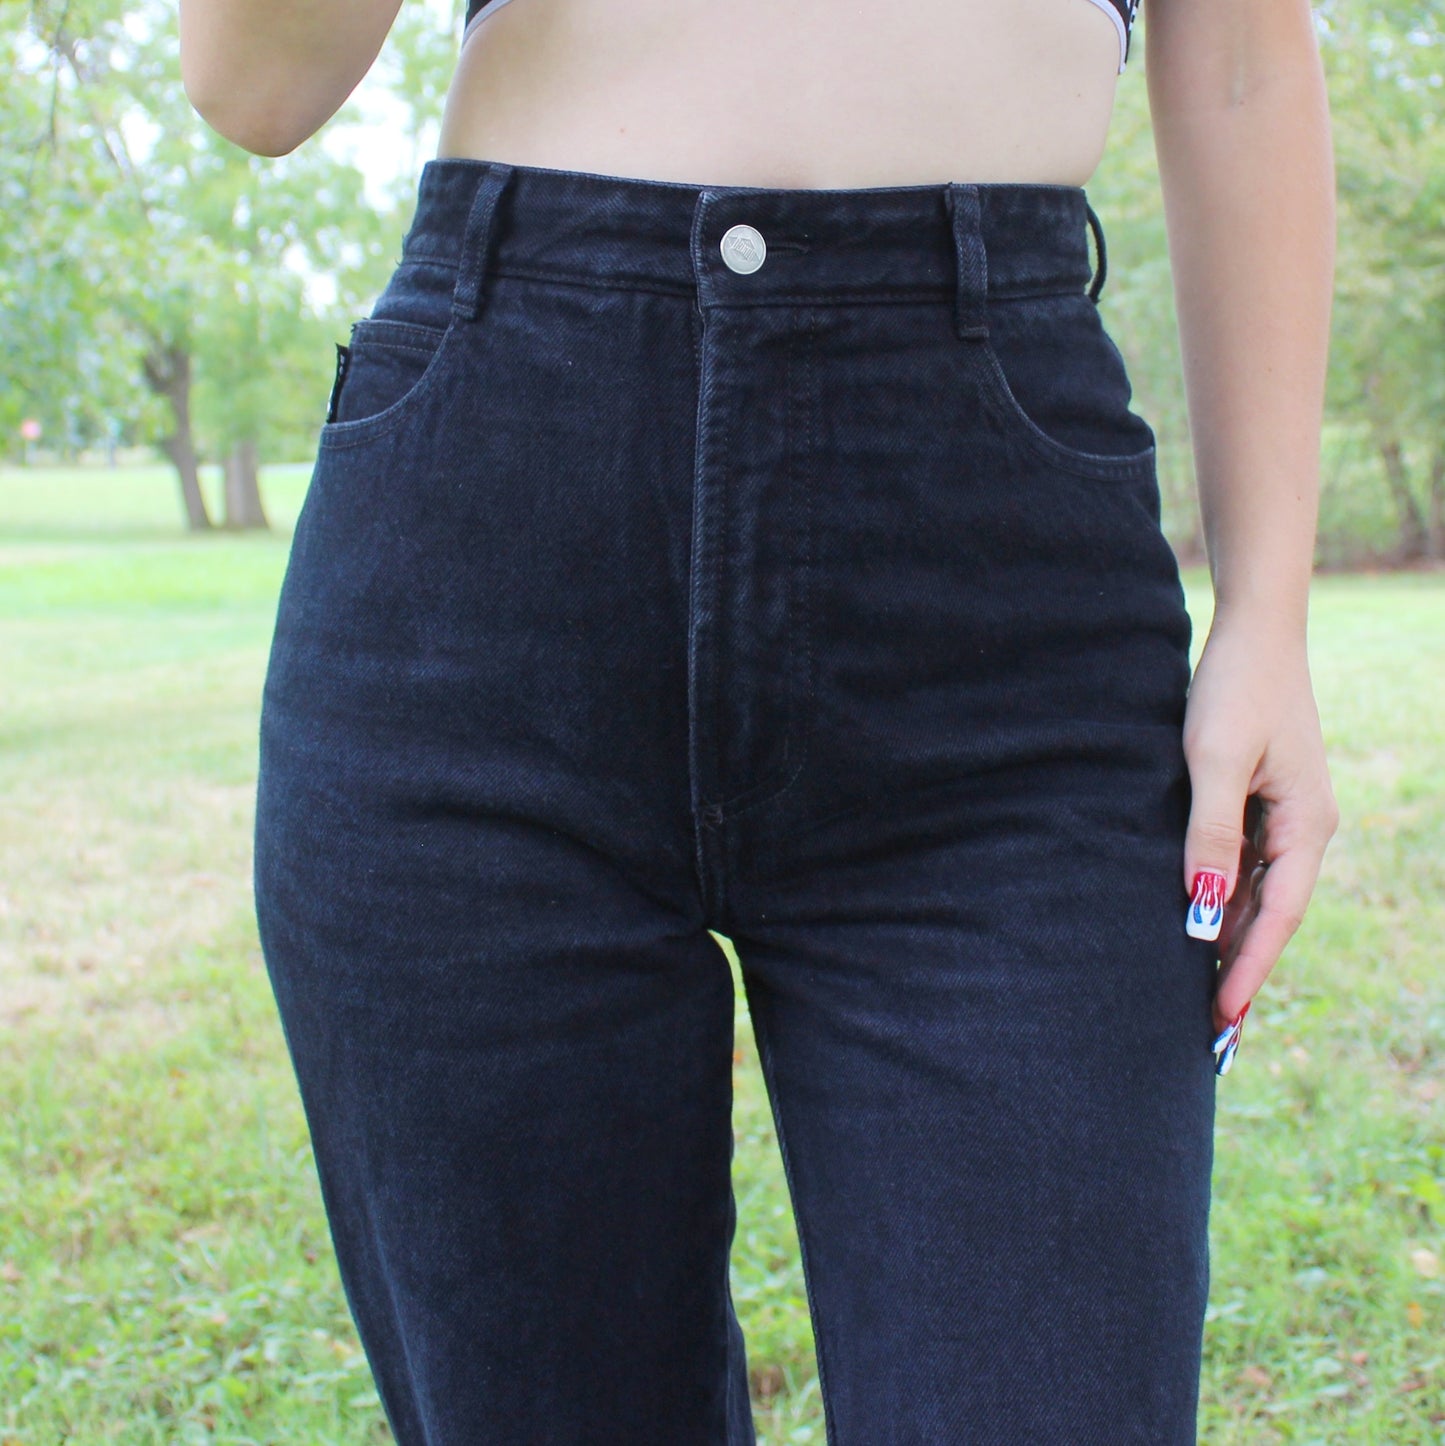 Vintage 90s Black High Waisted jeans from Bongo by Gene Montessano